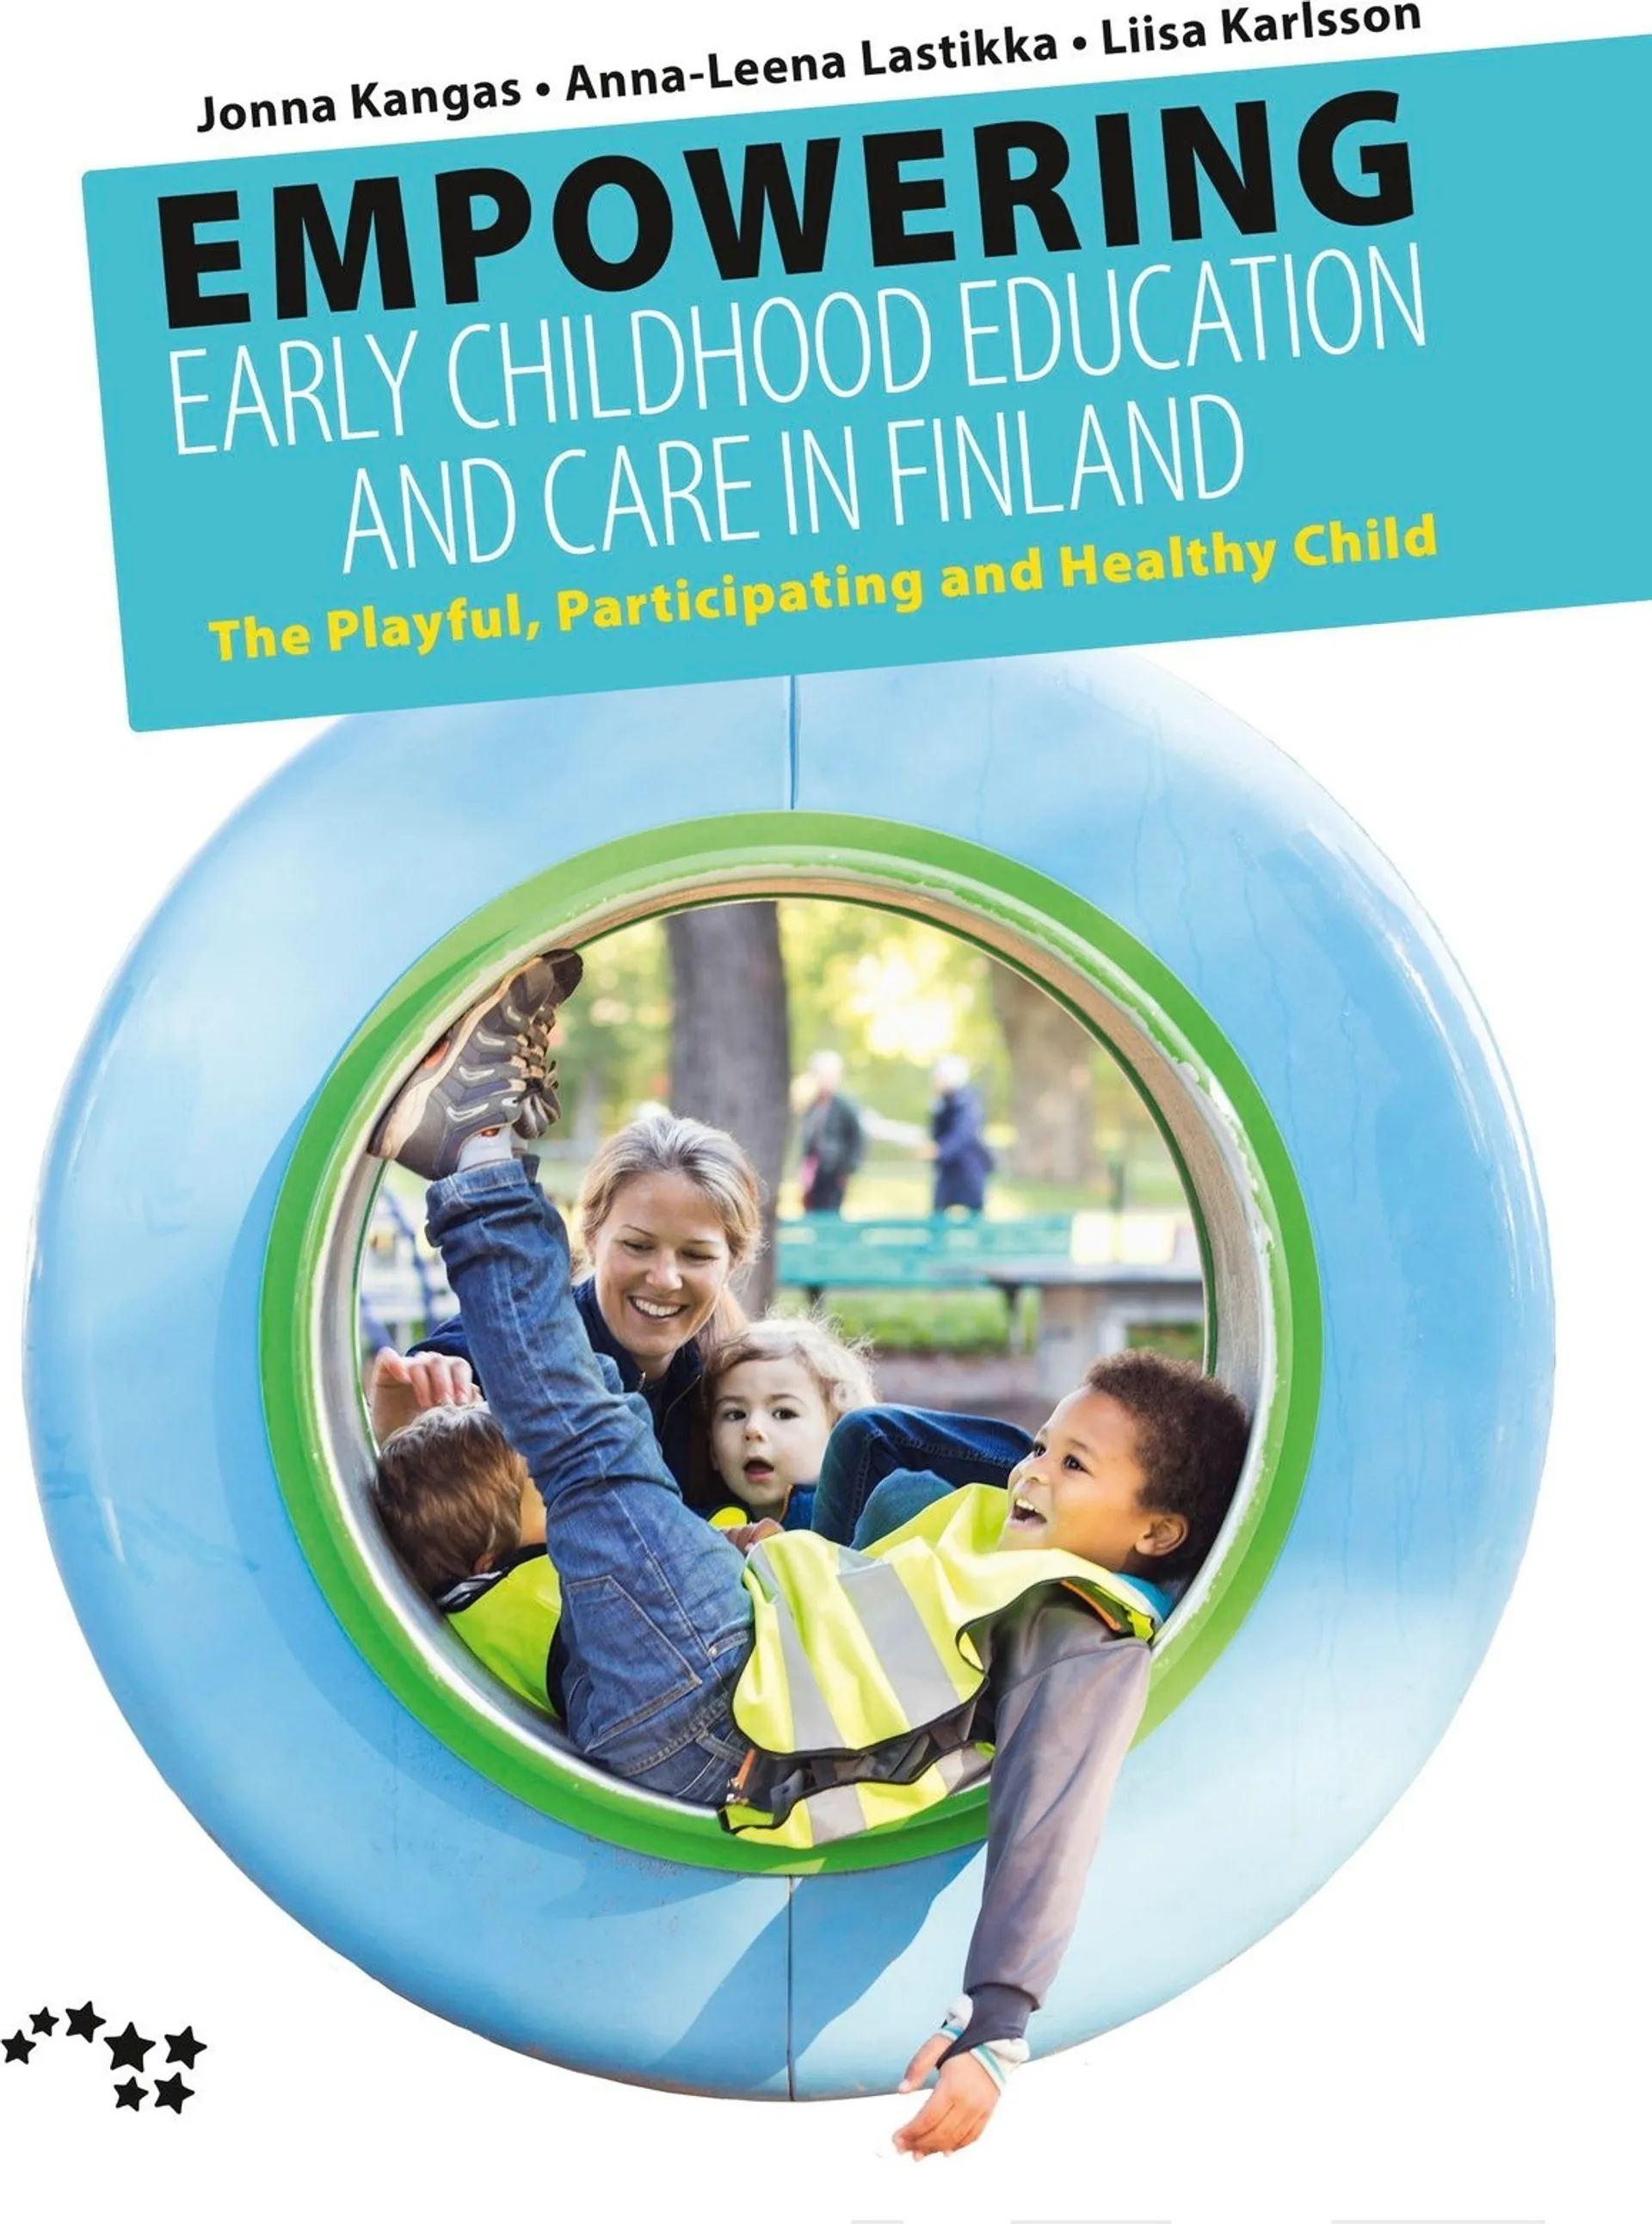 Kangas, Empowering Early Childhood Education and Care - The Playful, Participating and Healthy Child